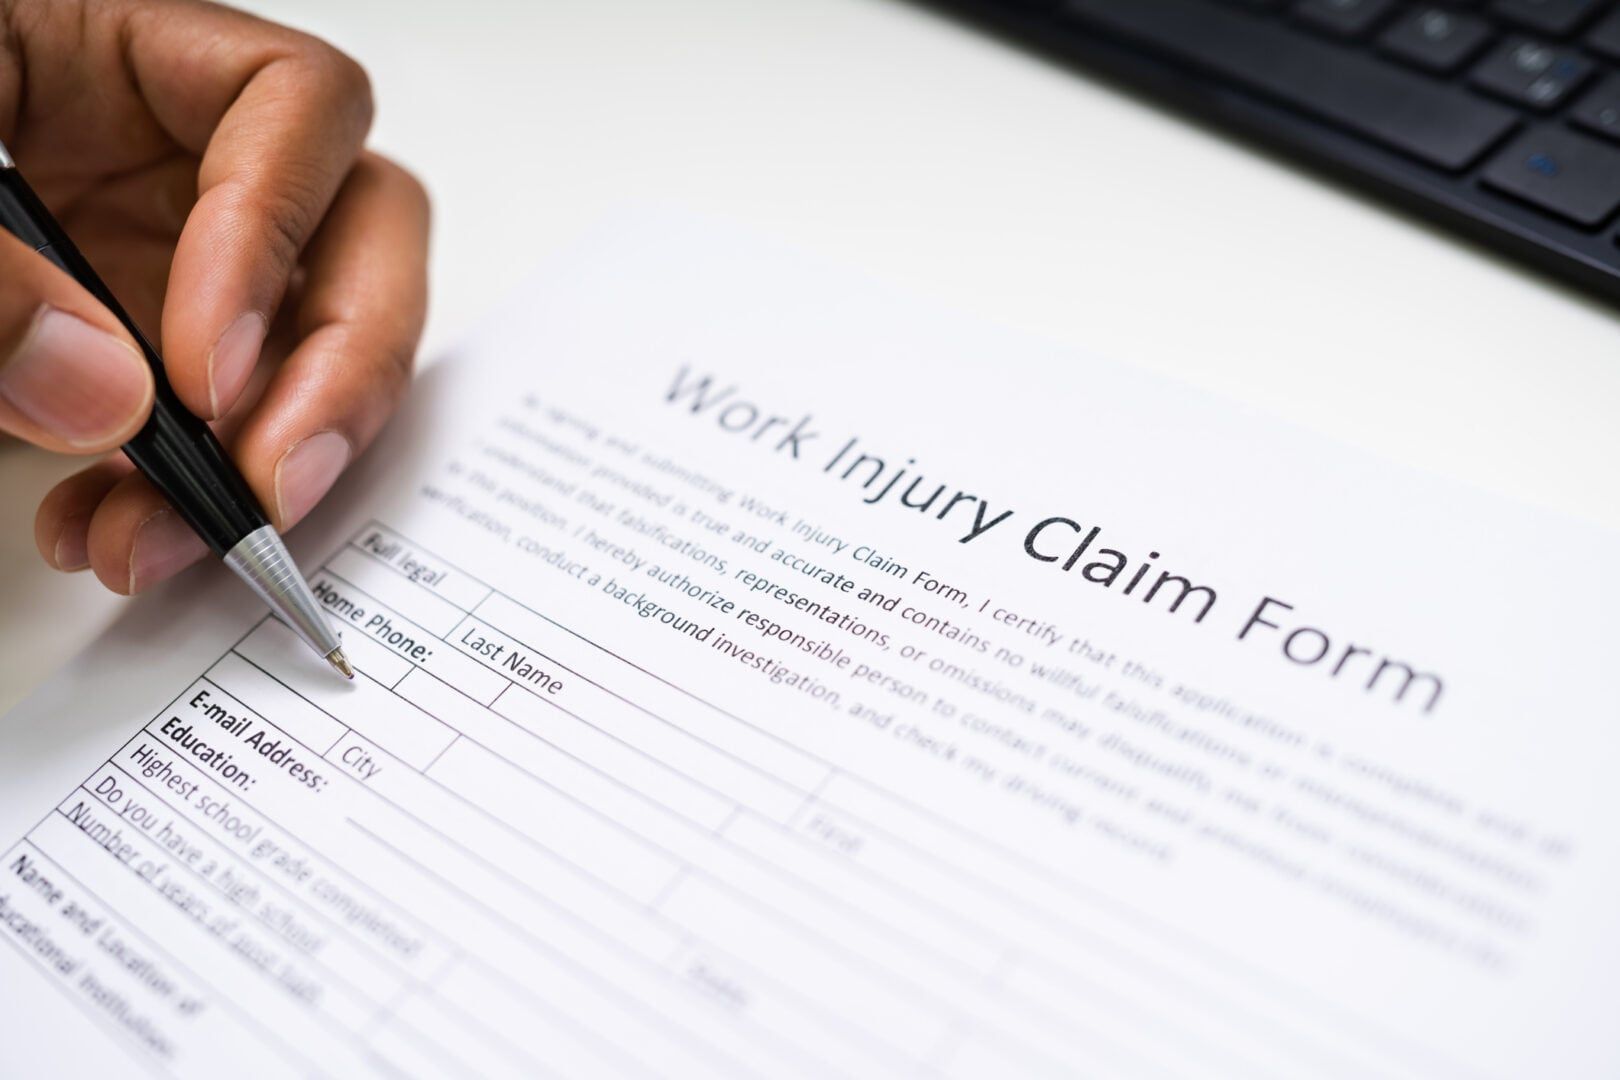 Why families need workers’ compensation insurance when they hire a caregiver